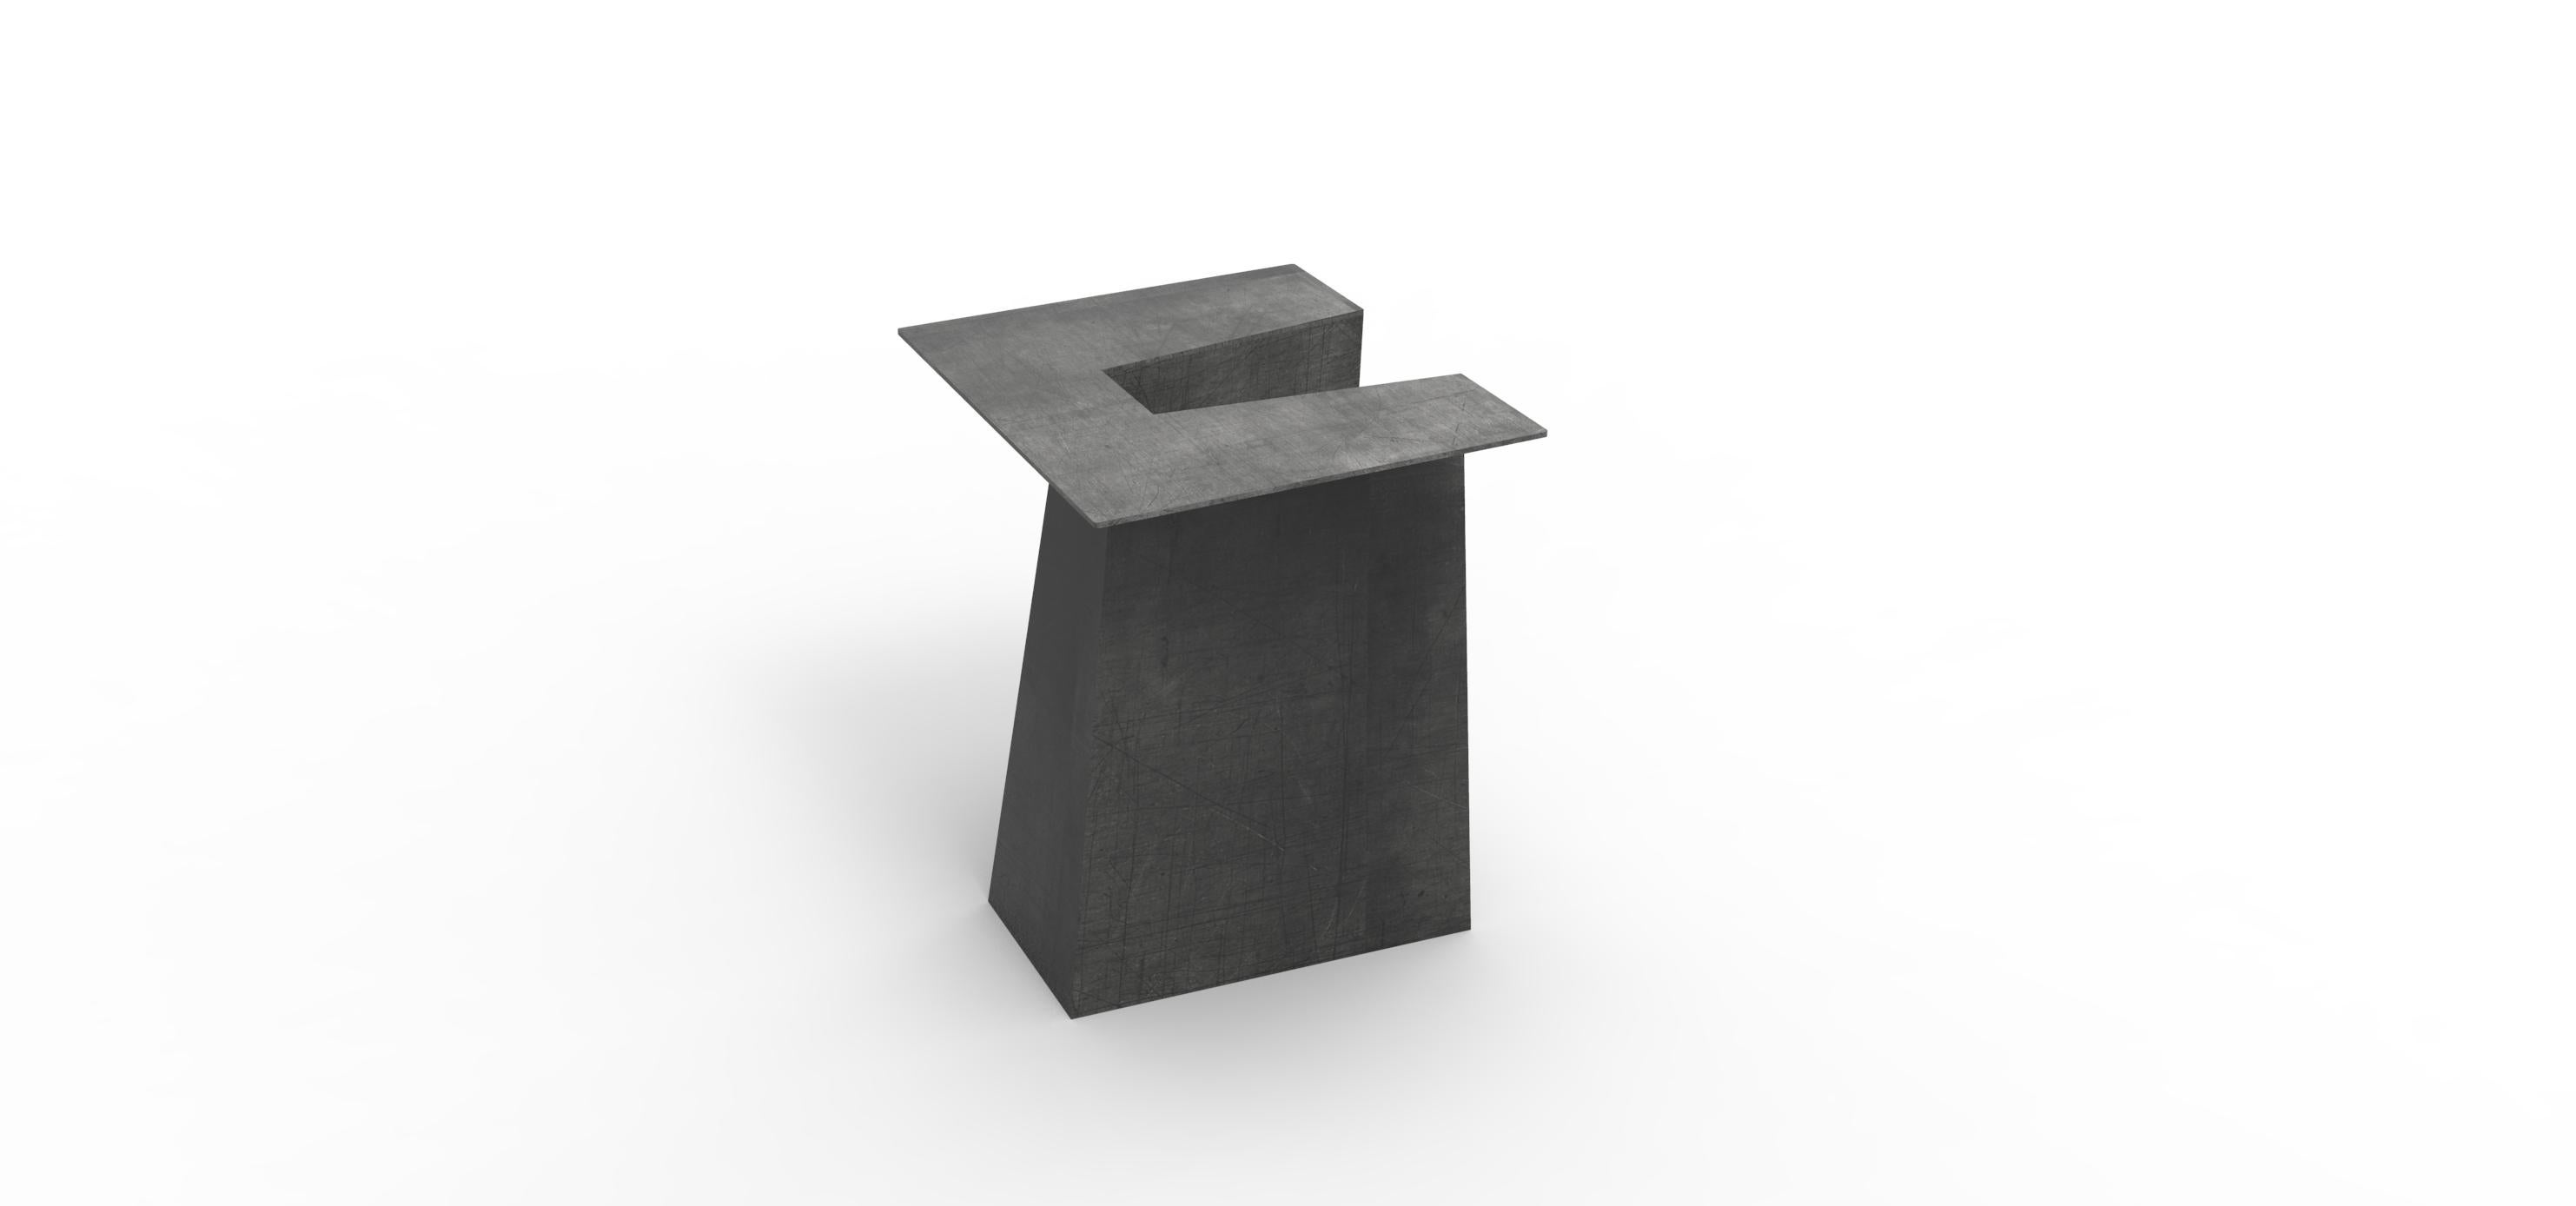 Z stool by Atelier Neil Nenner and Avihai Mizrahi 
Objects 
Dimensions: H 43 x L 42 x W 38 cm
Materials: Iron

Avihai Mizrahi (b. 1979, Jerusalem), Independent designer / Artist and lecturer in visual communication, holds a B.des in visual